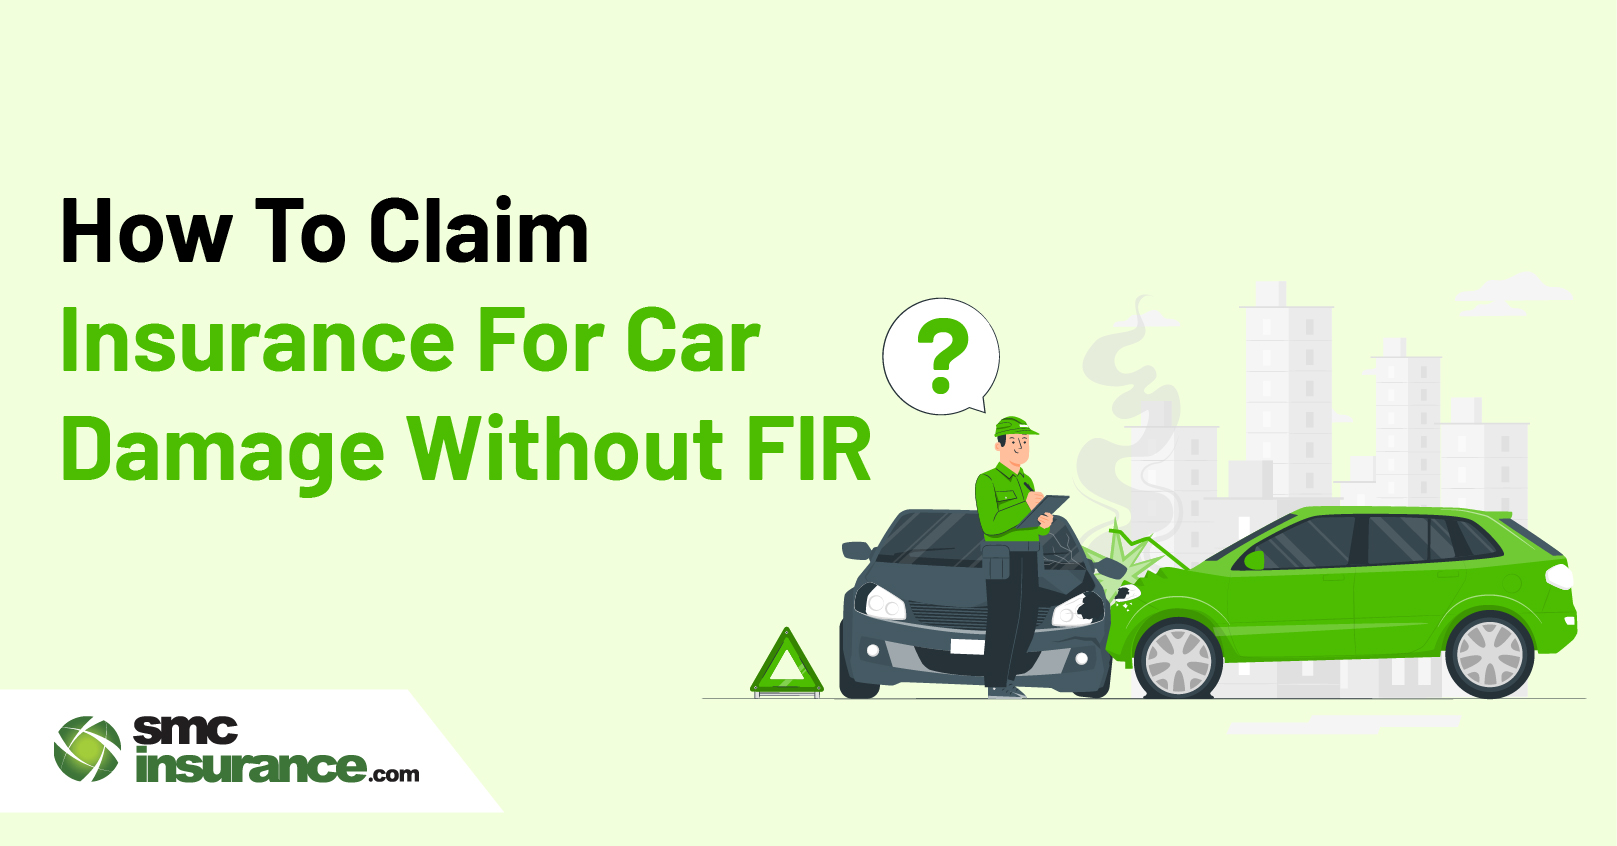 How To Claim Insurance For Car Damage Without FIR?